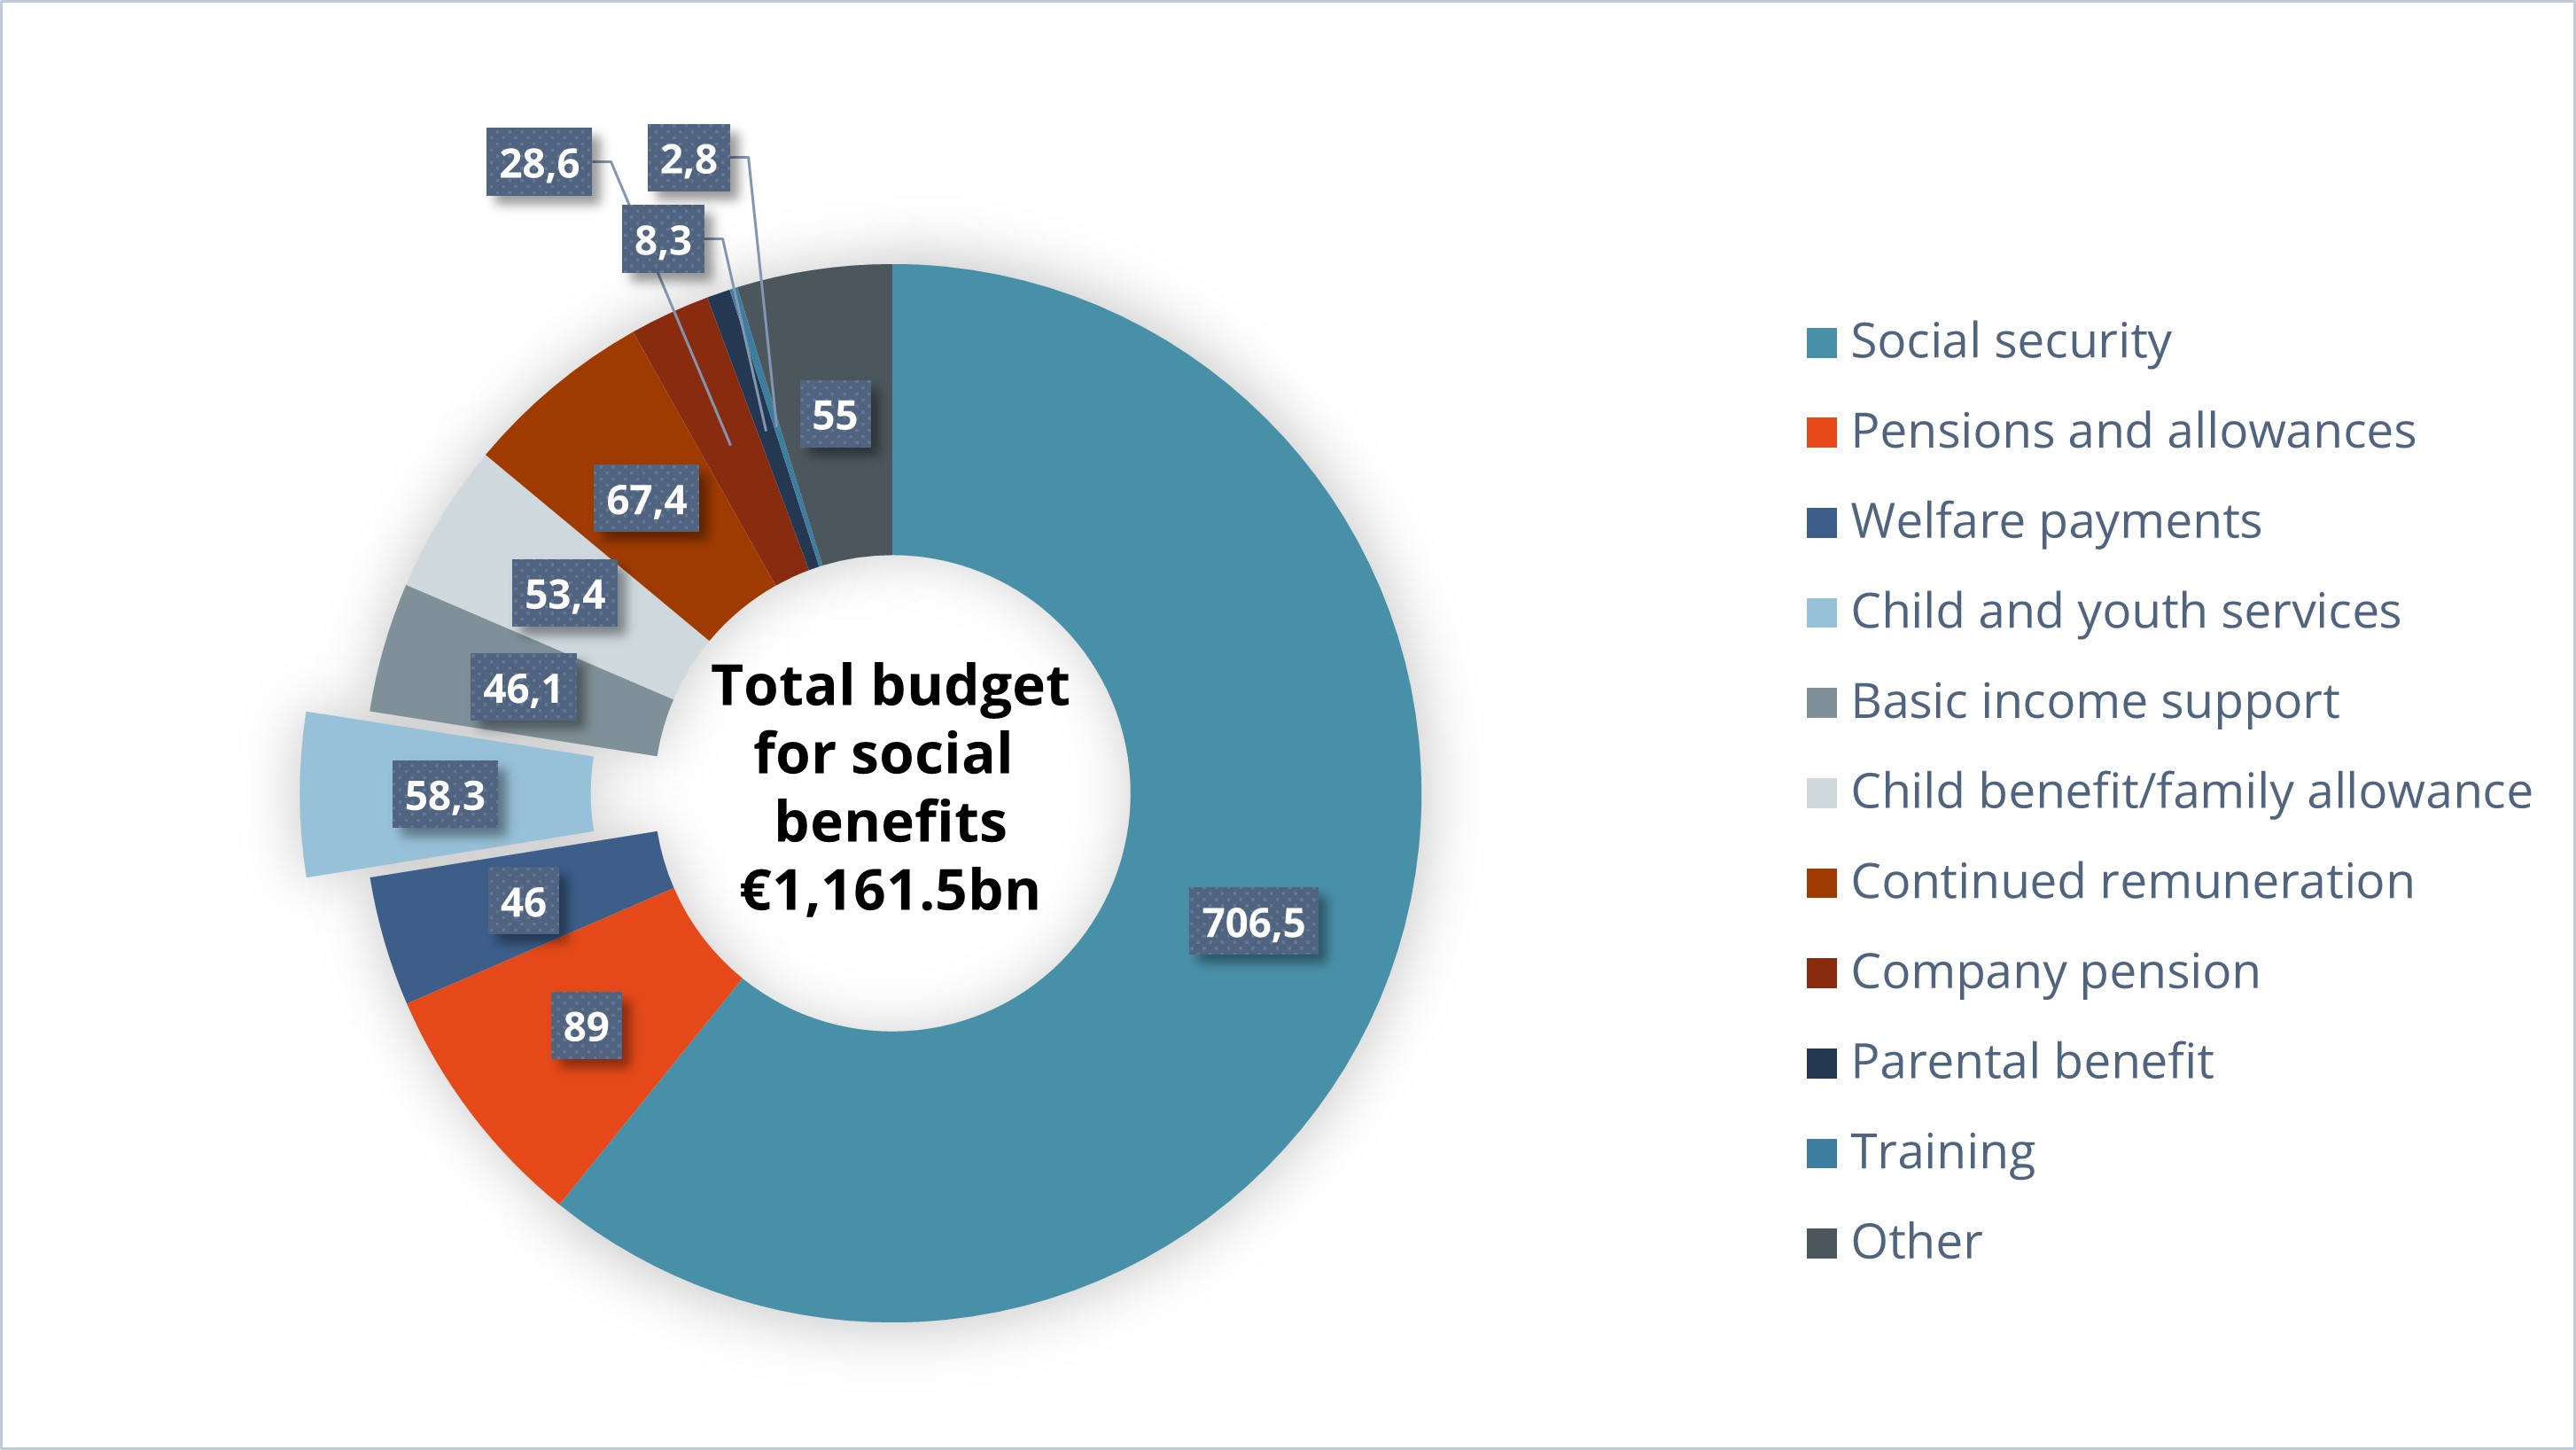 Structure of social benefits by type in 2021 in billions of euros (see also notes)